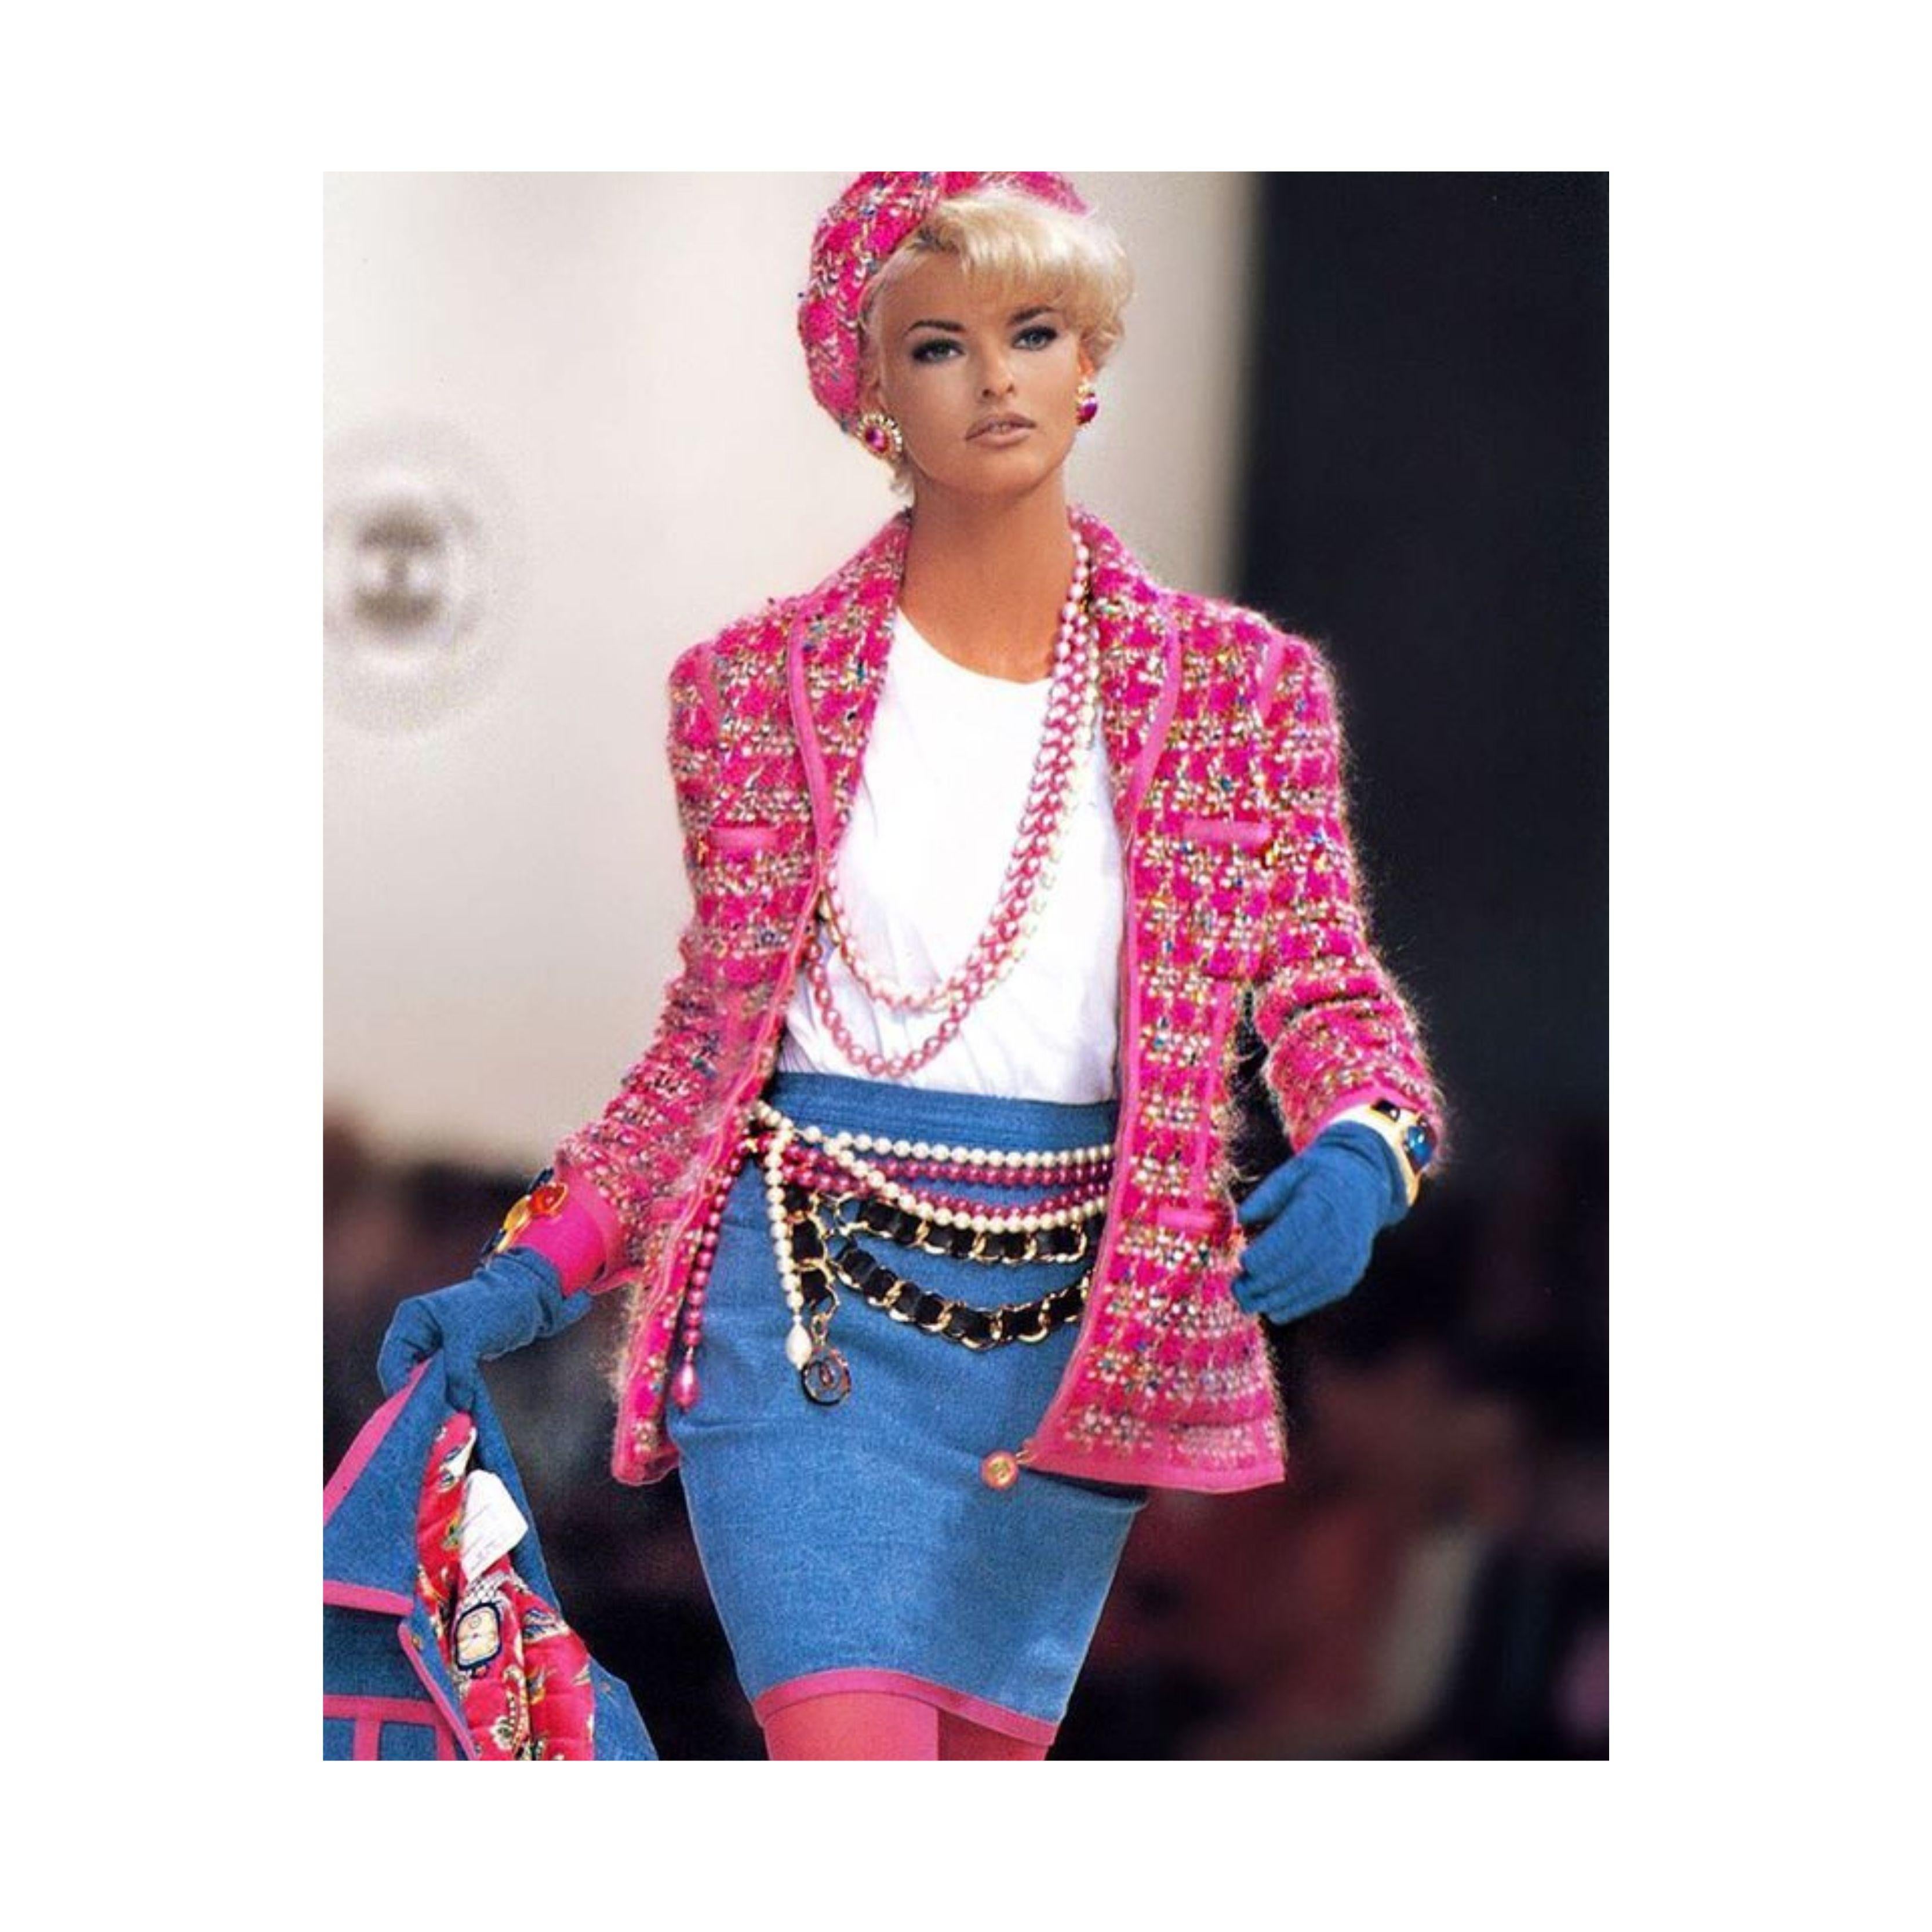 Chanel pink wool tweed jacket from the Hip-Hop-Inspired Fall 1991 collection. The jacket was worn by Linda Evangelista on the runway. 

It features a front zip and a golden pull tab with the double CC logo buttons that match the buttons on the 4